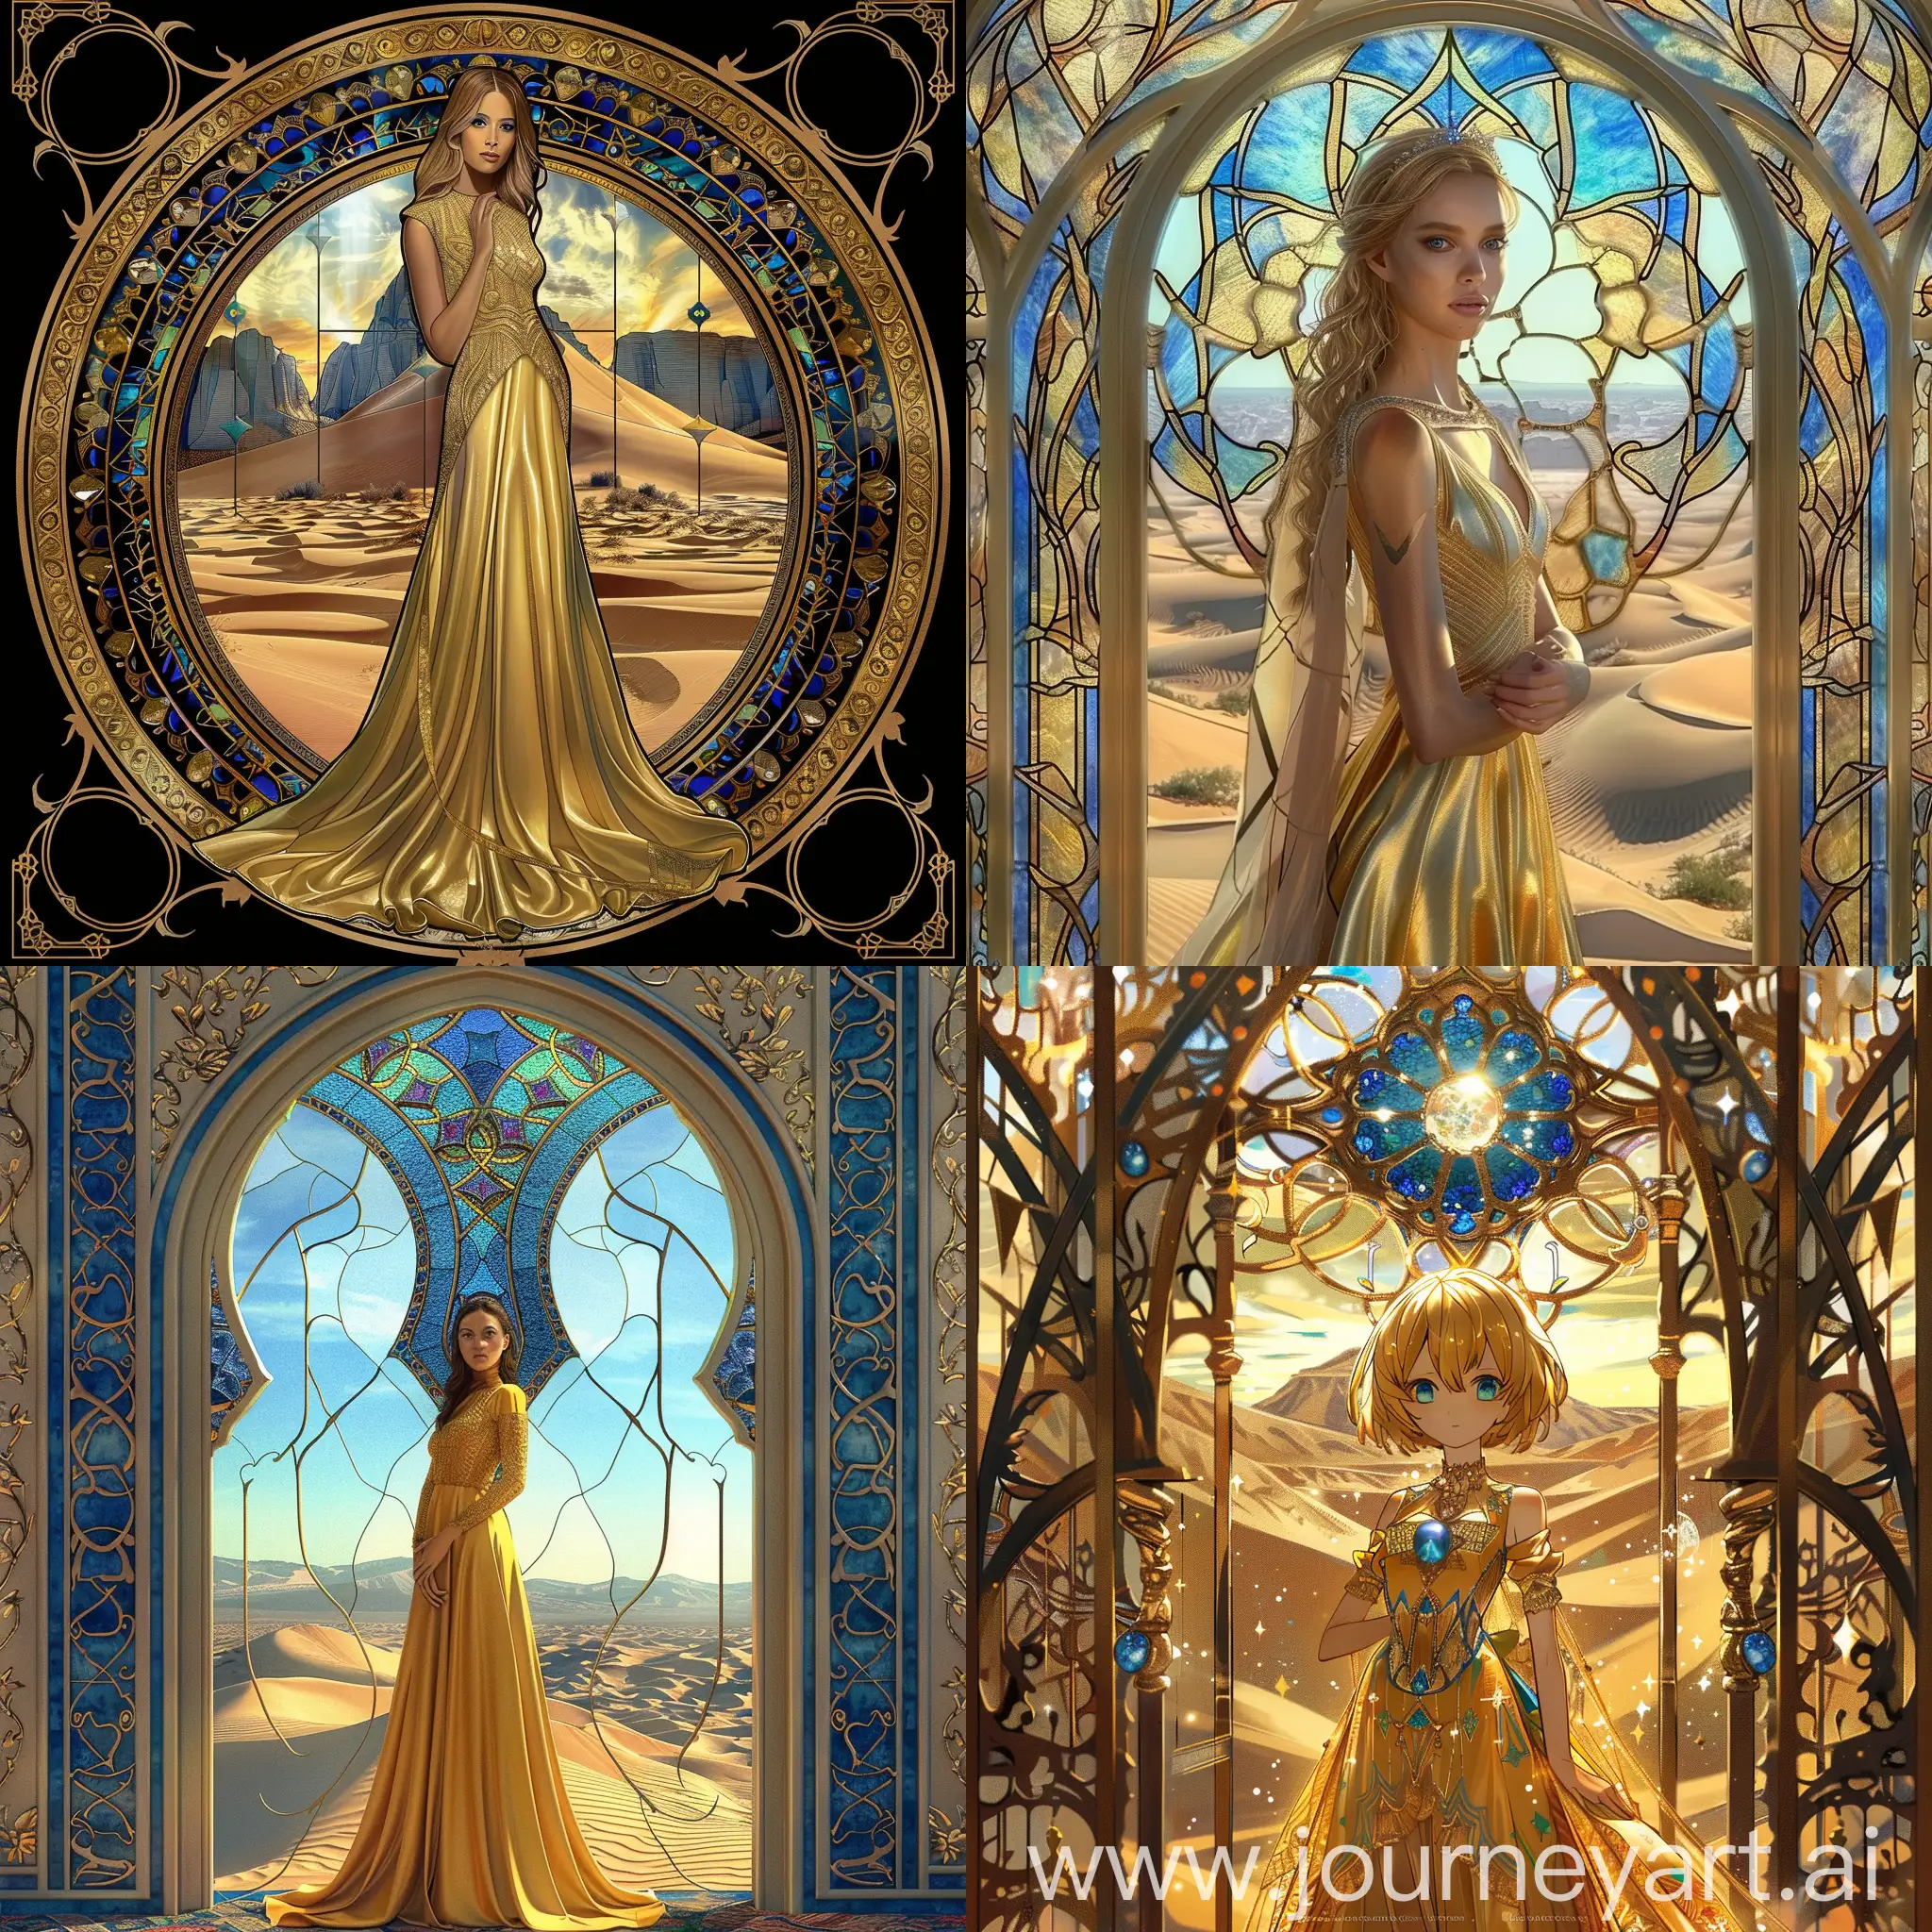 Blue-eyes golden princess standing in front of an ornate stained glass window with the pattern of a giant desert, 32k 